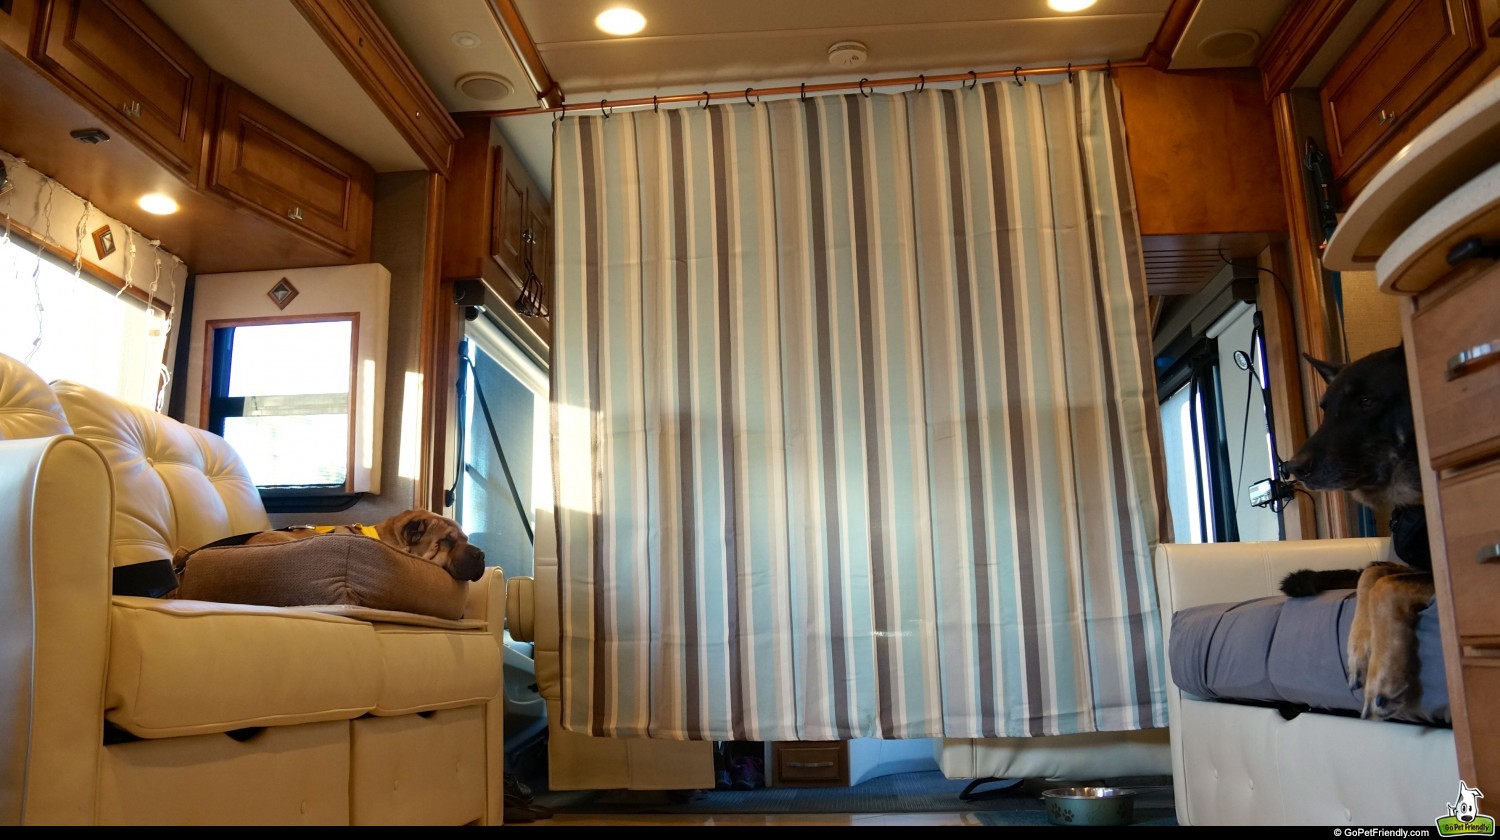 Curtain in new Meridian to keep dog from barking in RV